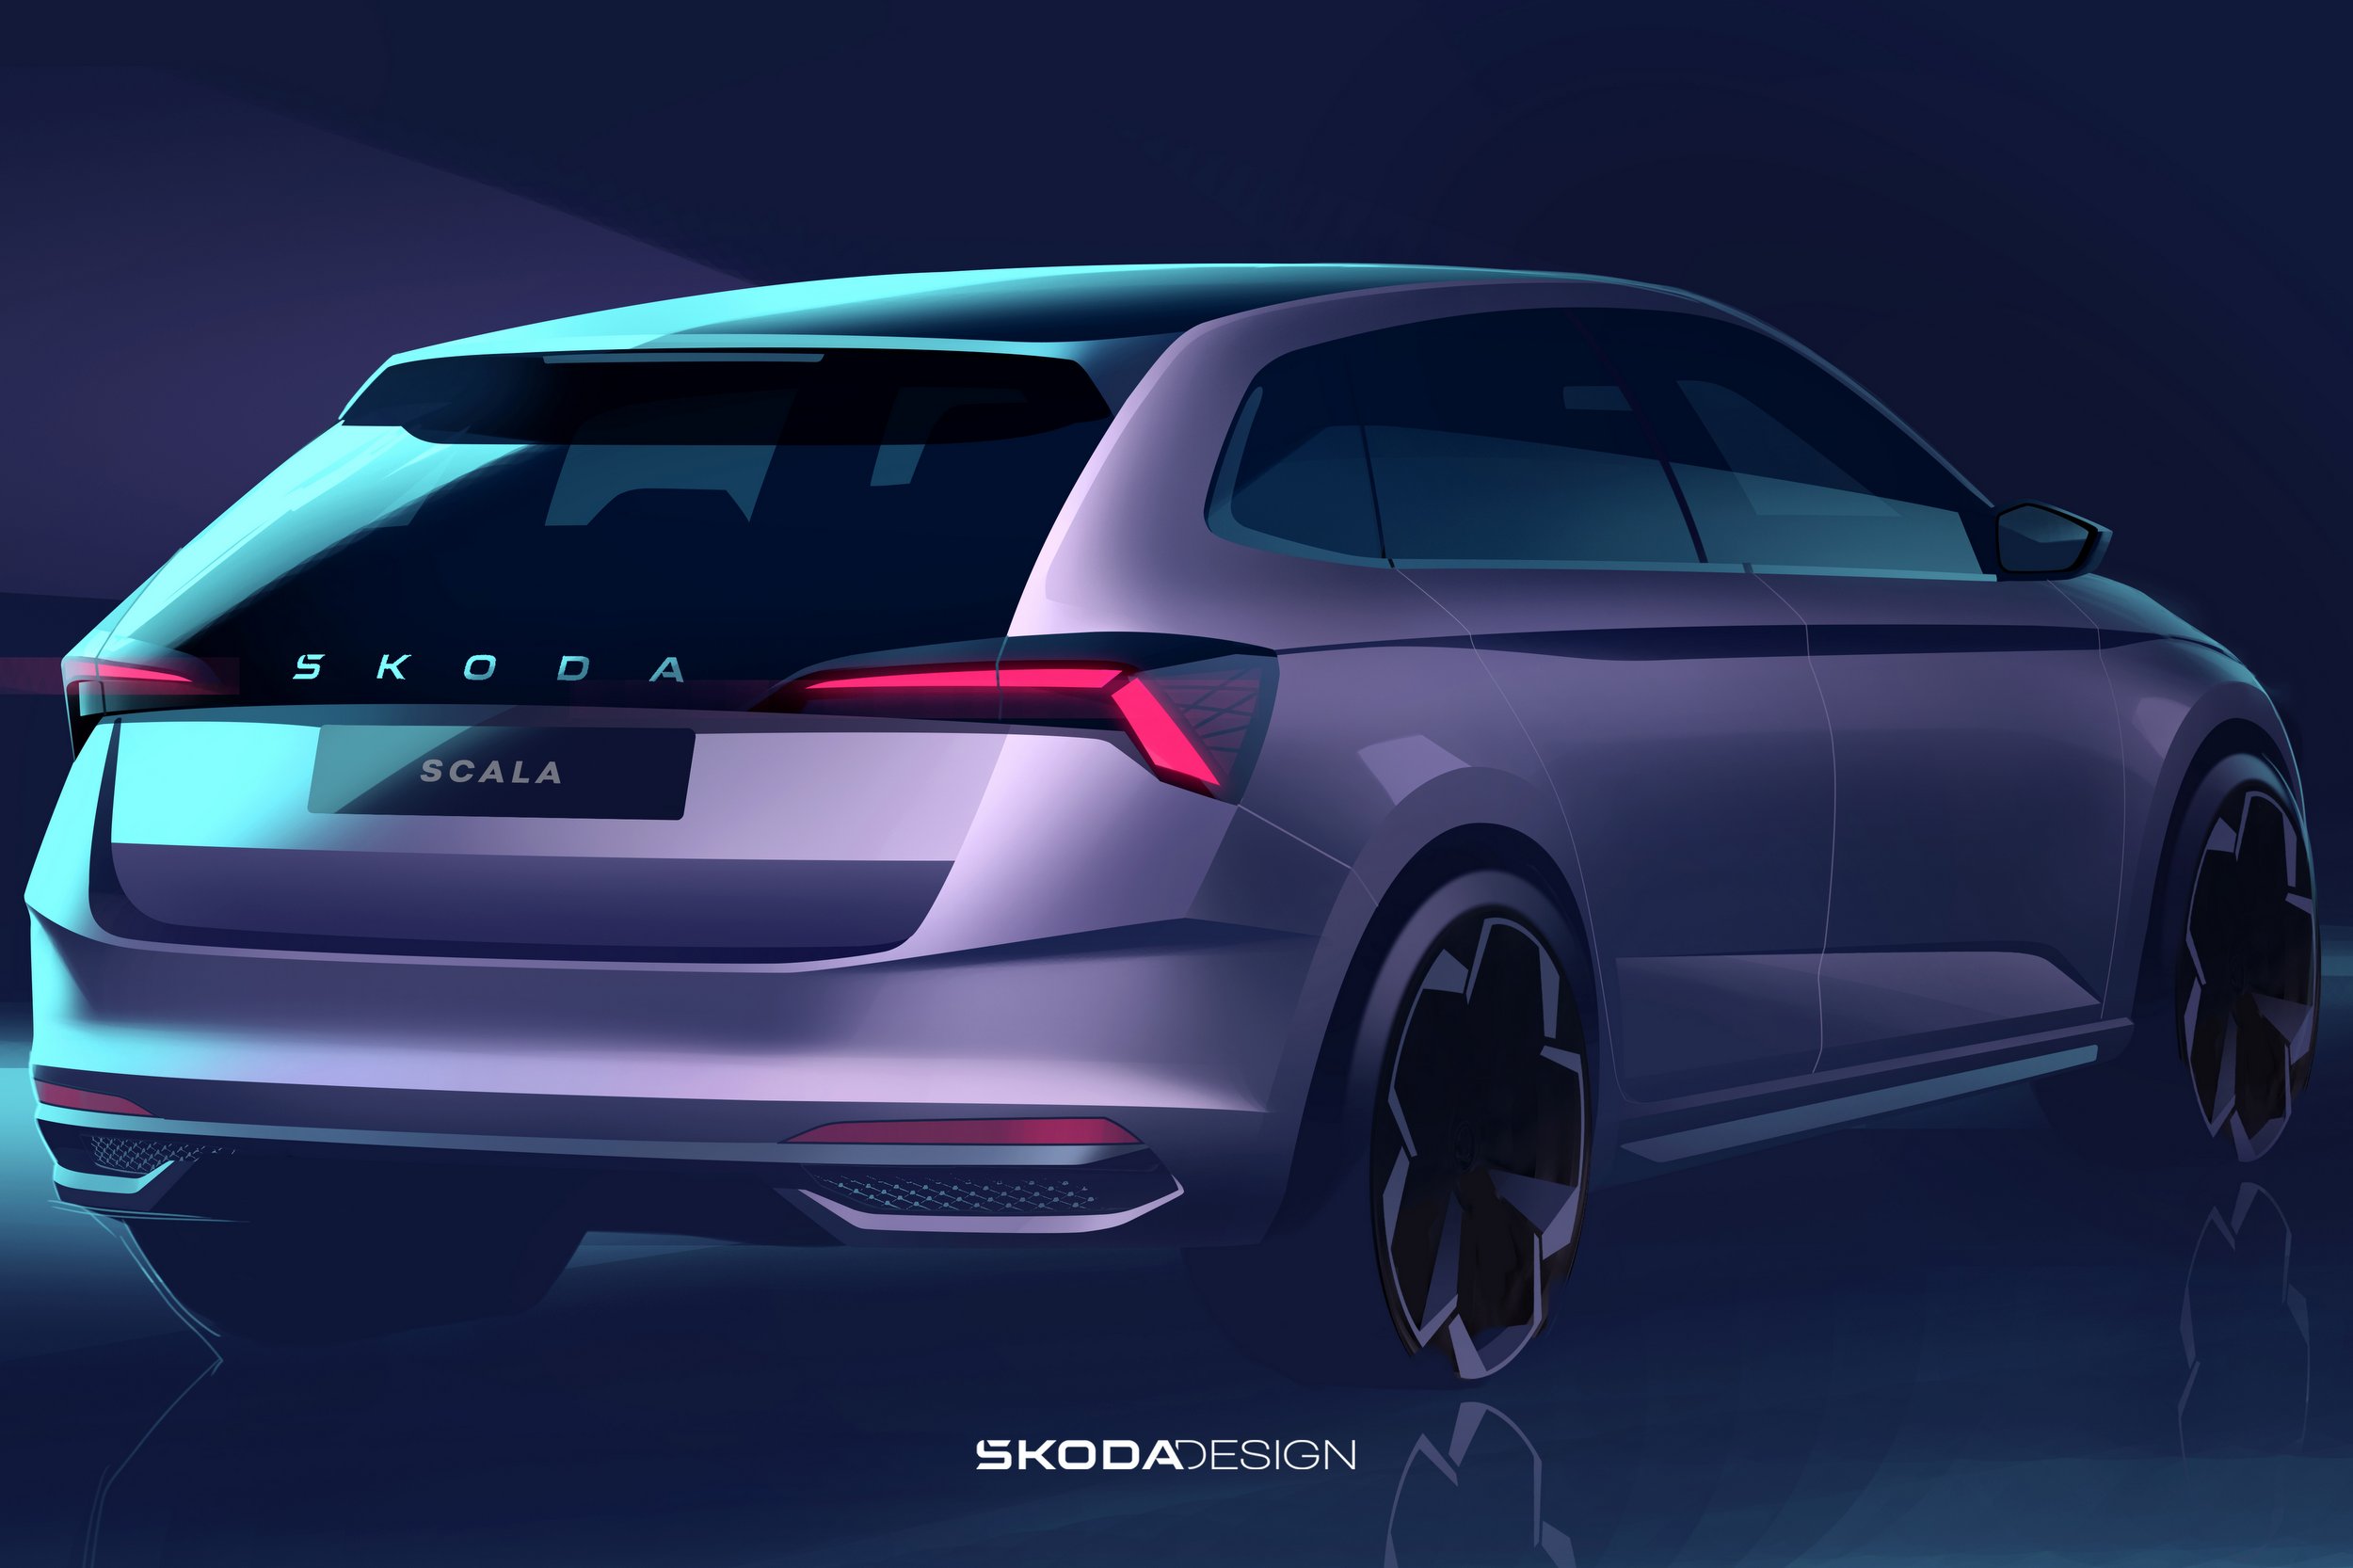 Skoda 4 details its compacts again